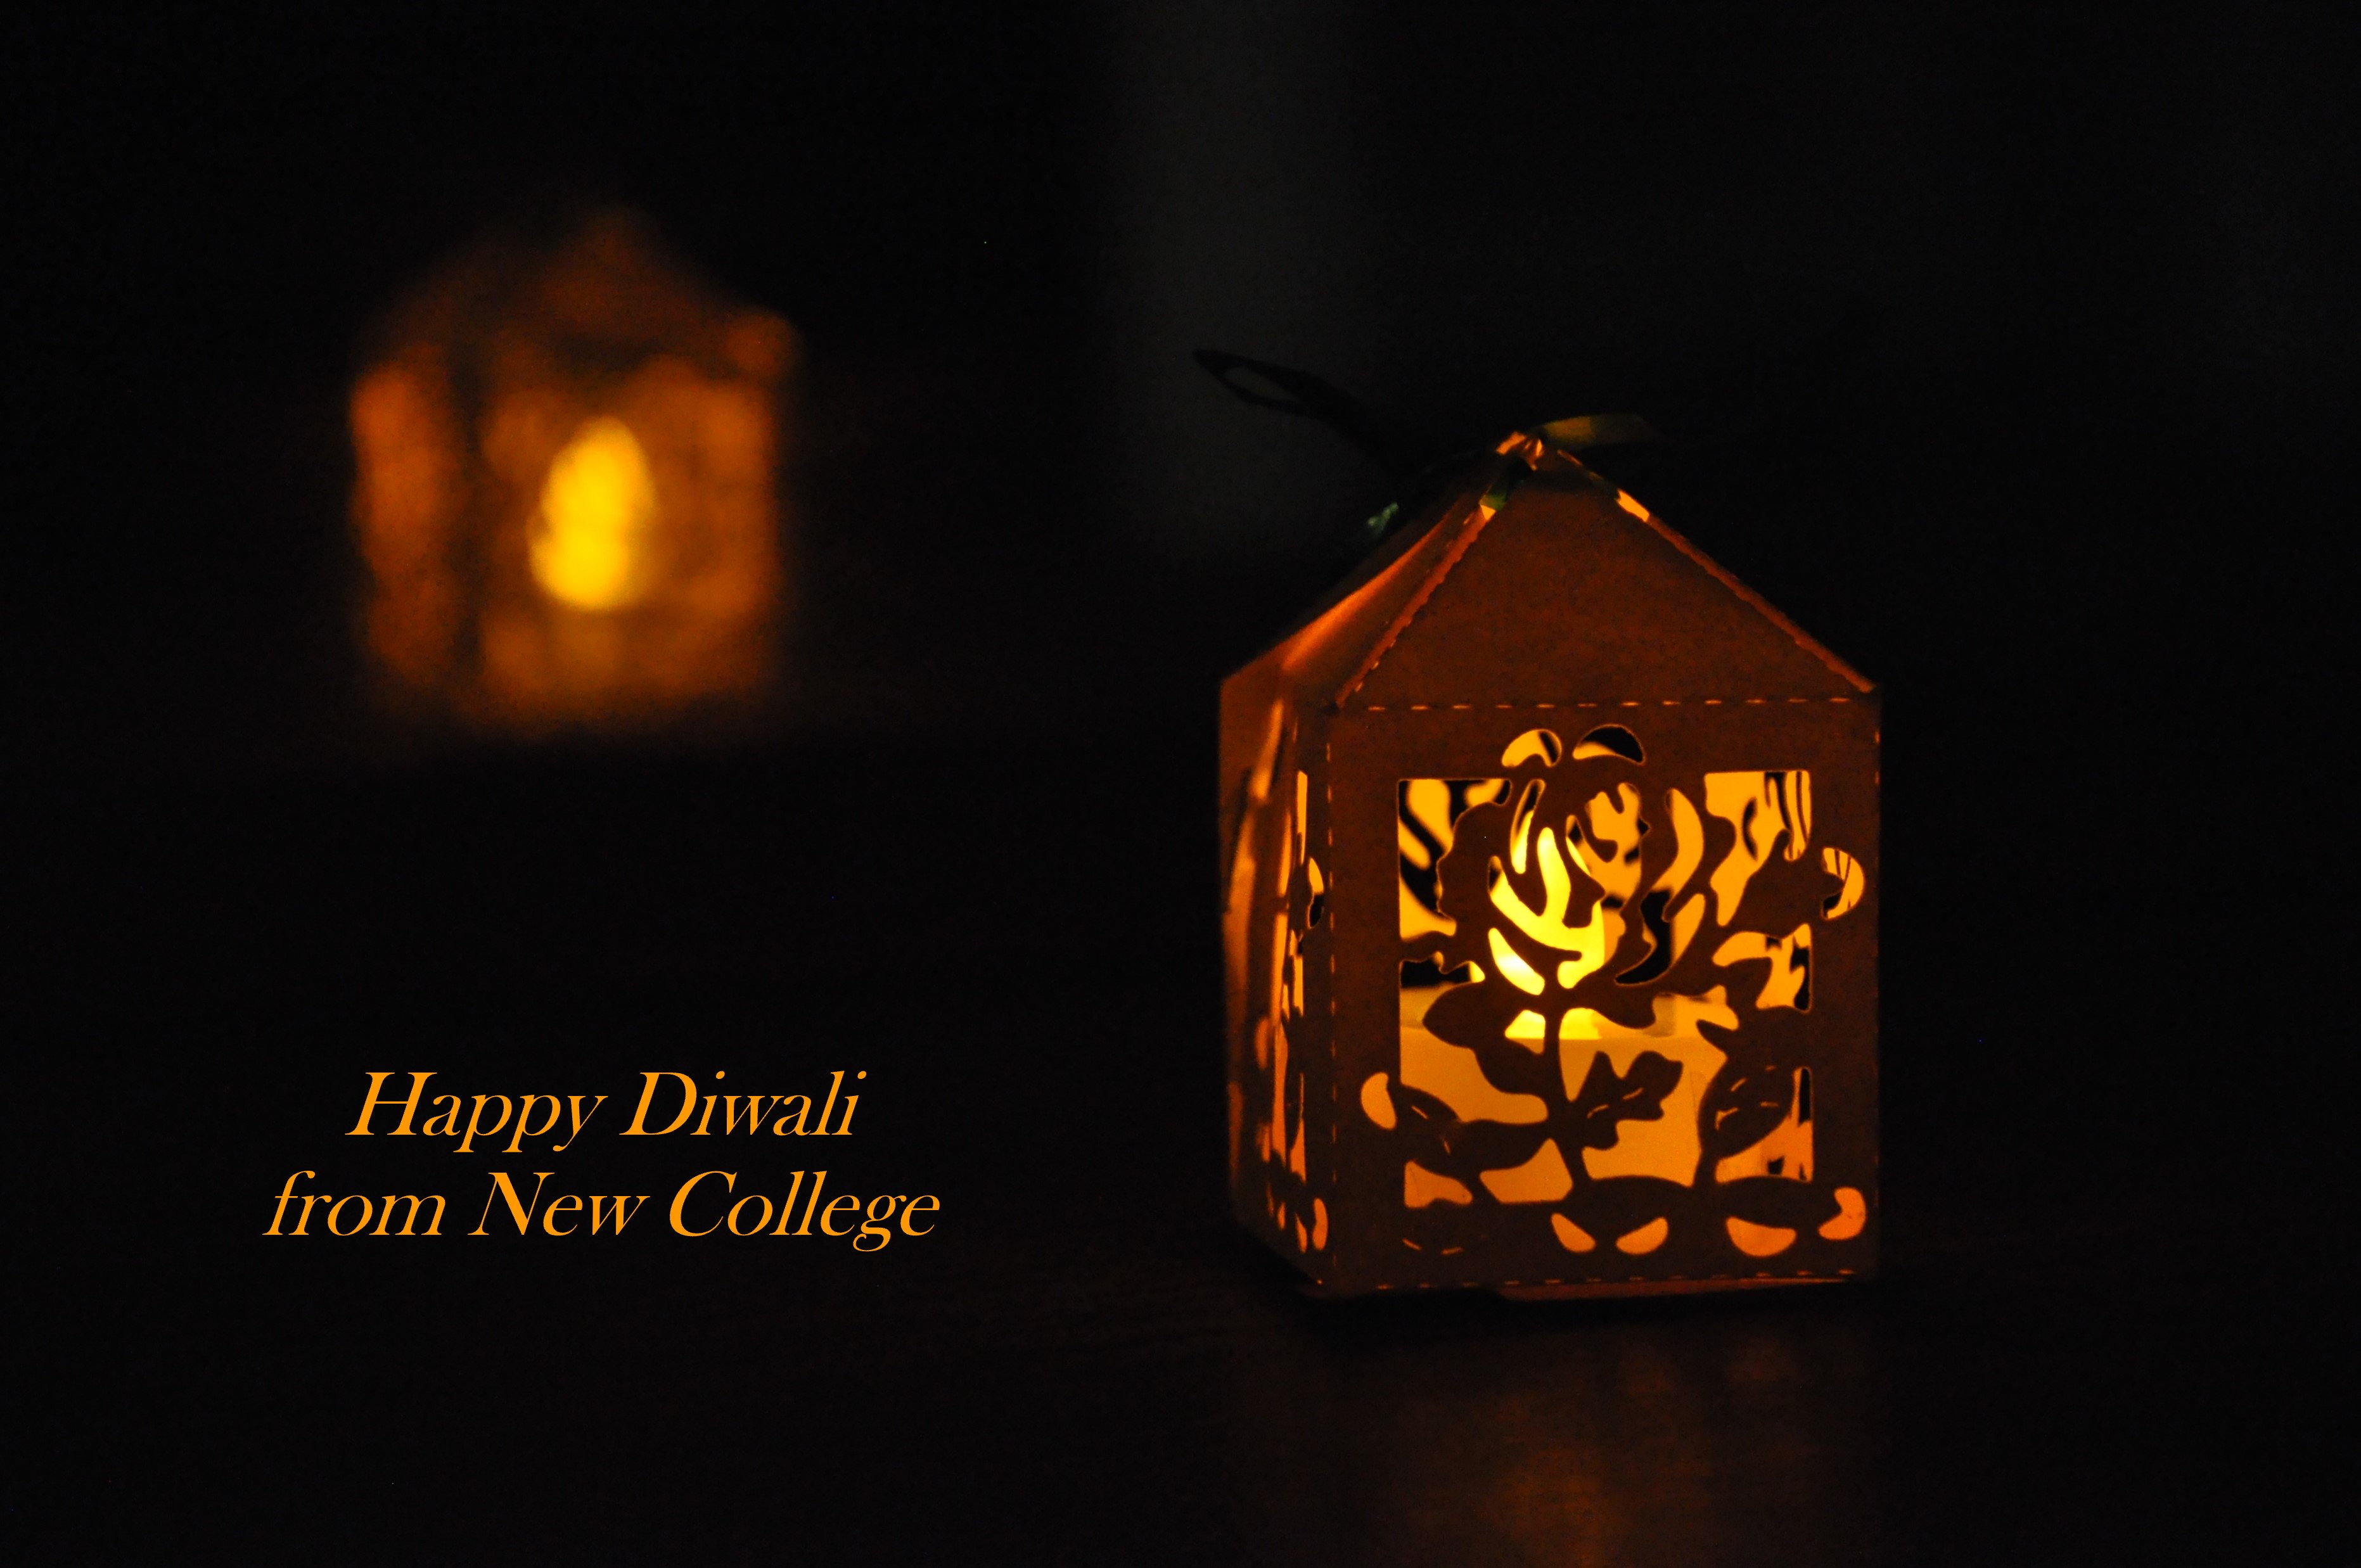 Small lantern containing a tea light, with the words 'Happy Diwali from New College' alongside